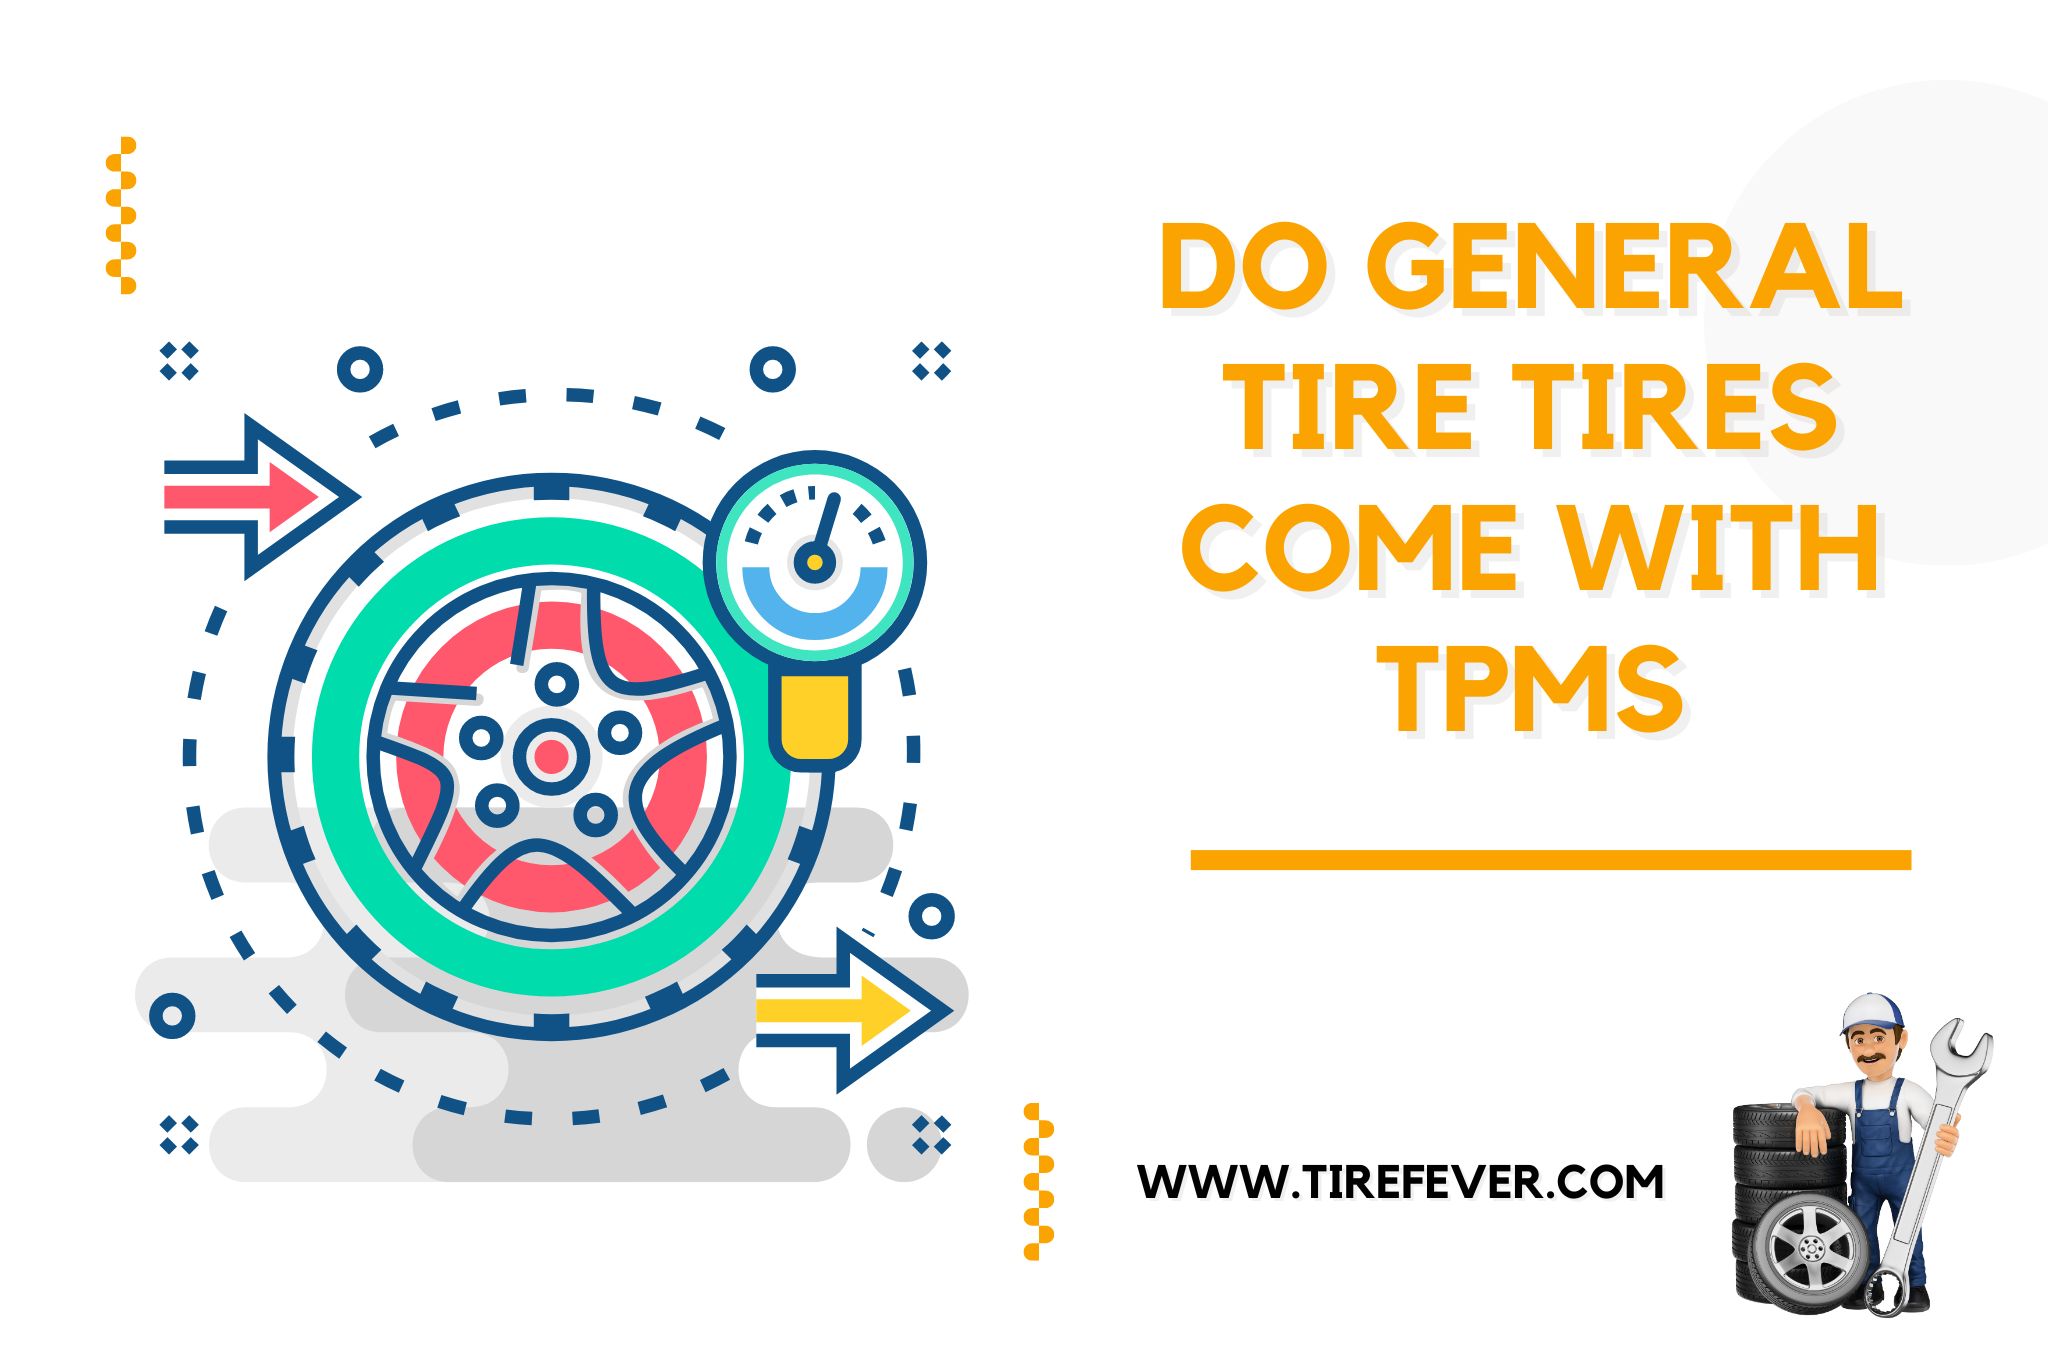 Do General Tire Tires Come with TPMS